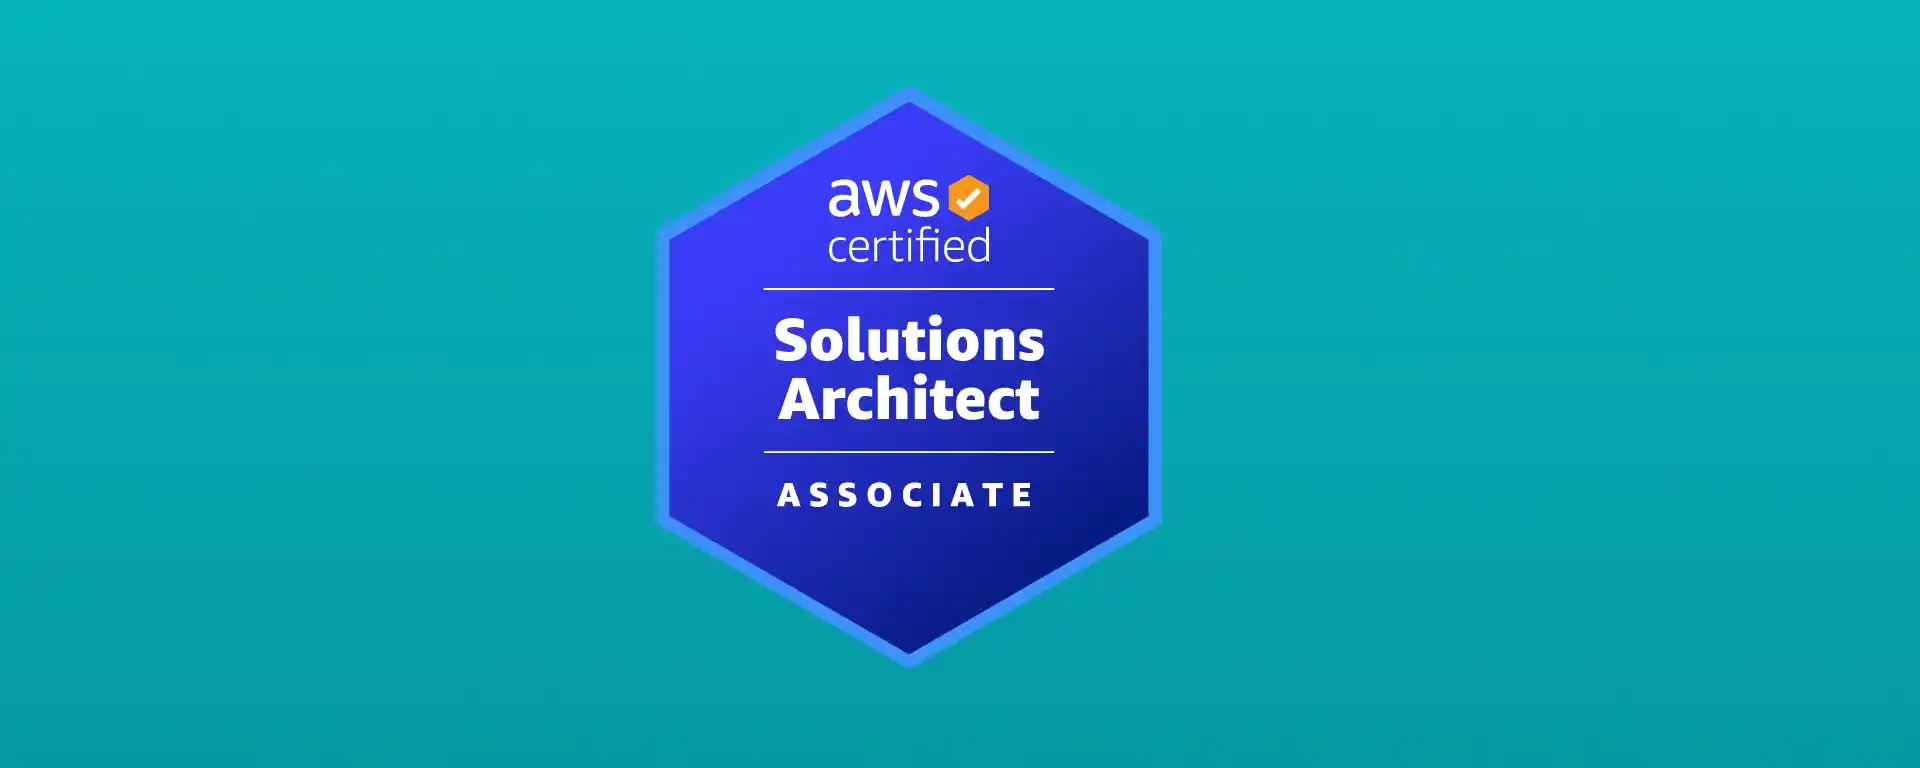 How to pass the AWS Solutions Architect Associate exam guide (2022)